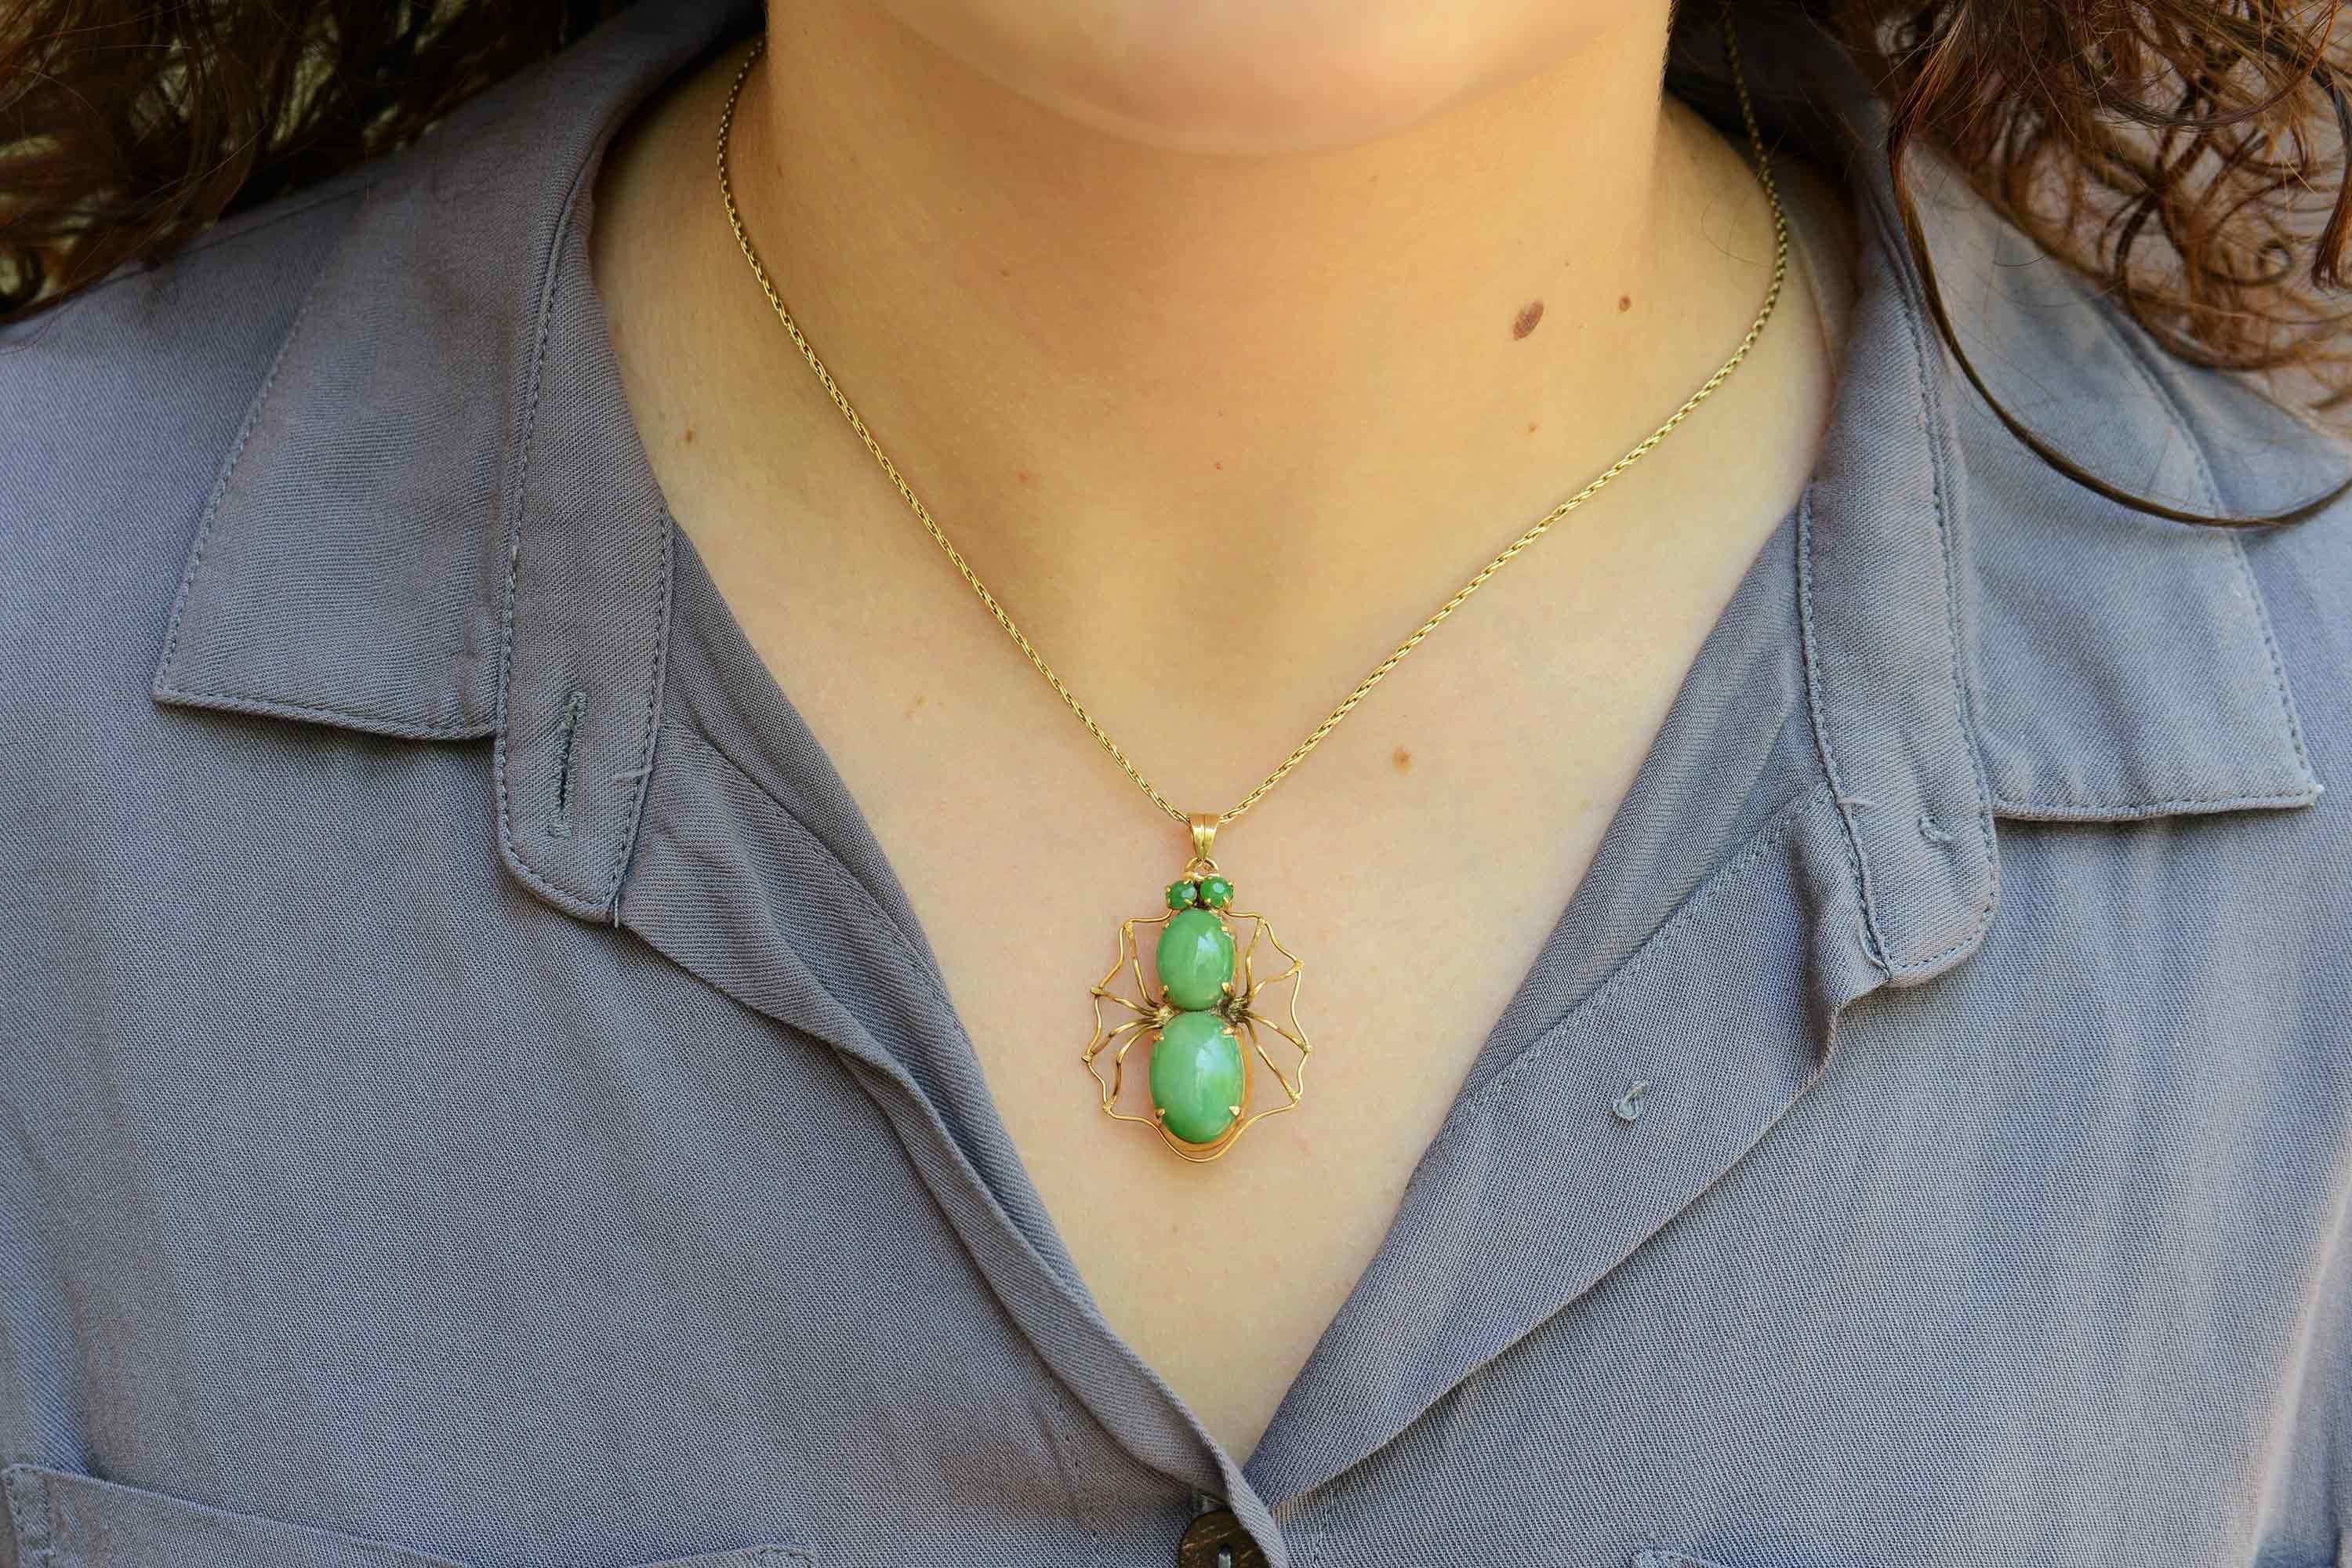 A charismatic and creepy-cool vintage natural jade spider necklace. The body set with a pair of crisp, apple-green jadeite cabochons, the clever arachnid brooch pin fashioned as a pendant makes for versatile wearability. You'll love how the frame